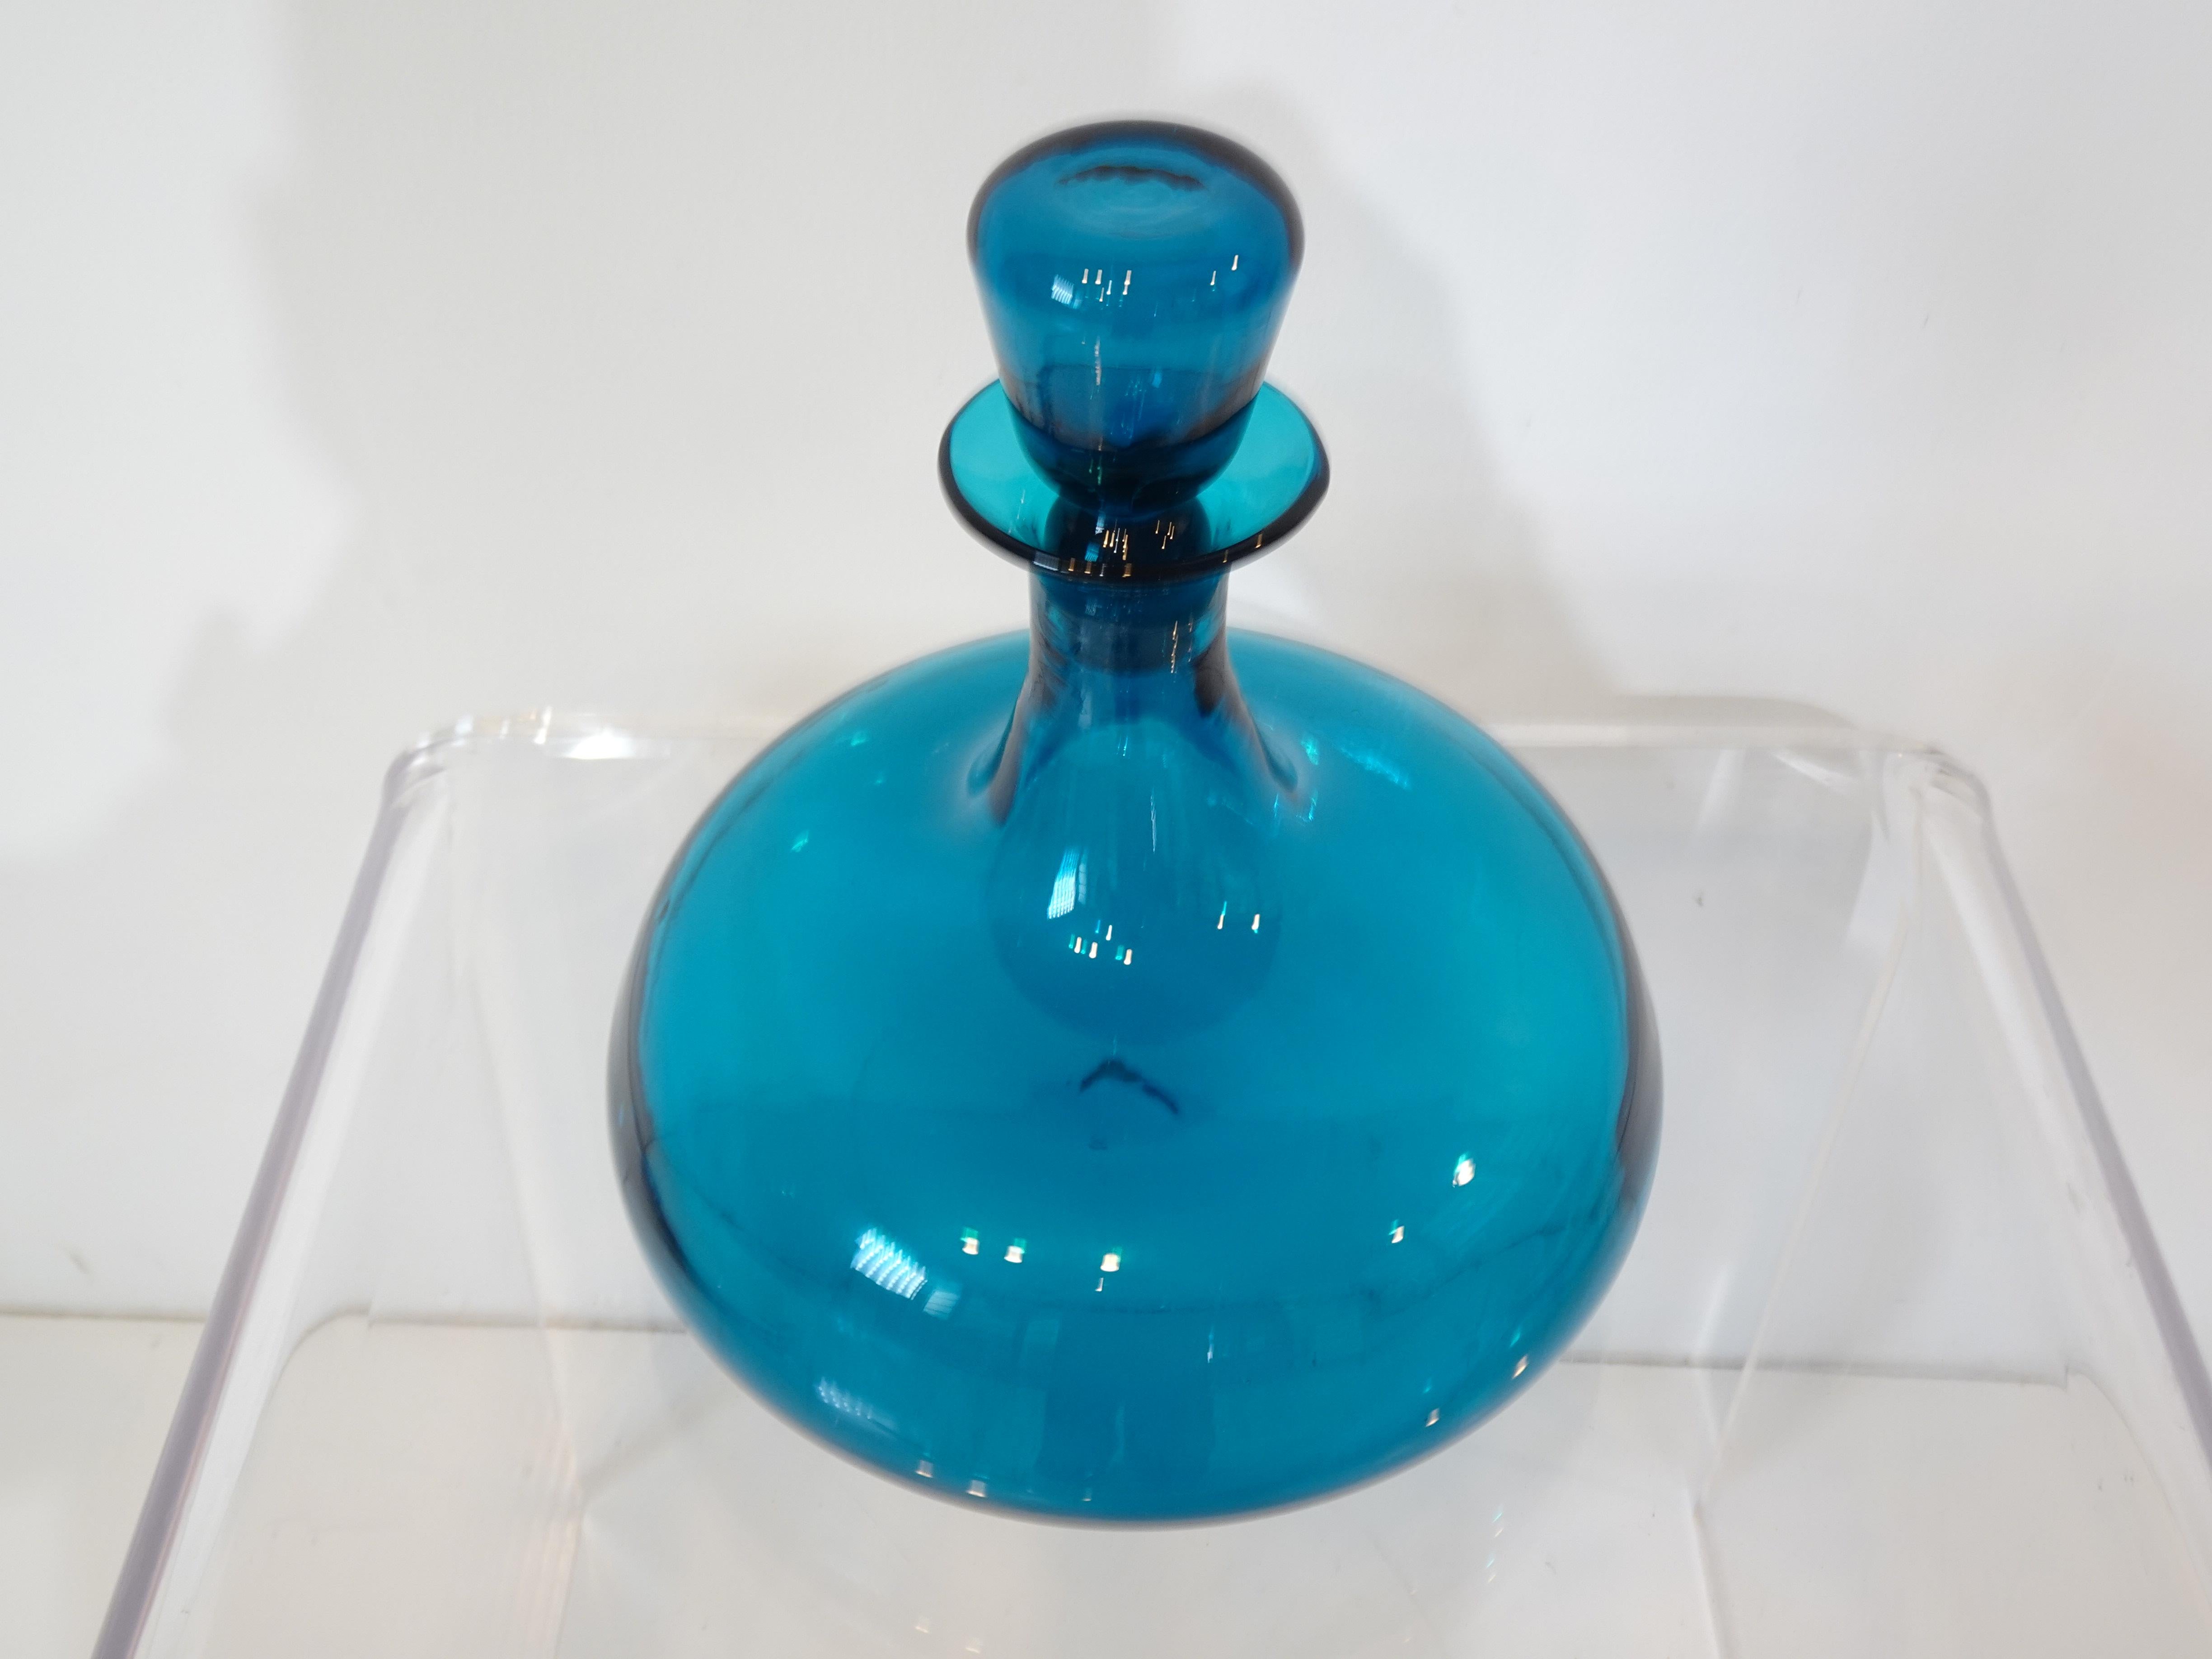 A nice handblown blue glass decanter with matching stopper designed and executed by well regarded glassblower Wayne Husted for the Blenko Glass Company. These iconic pieces were the statement accessory for Mid Century interiors and are as fresh